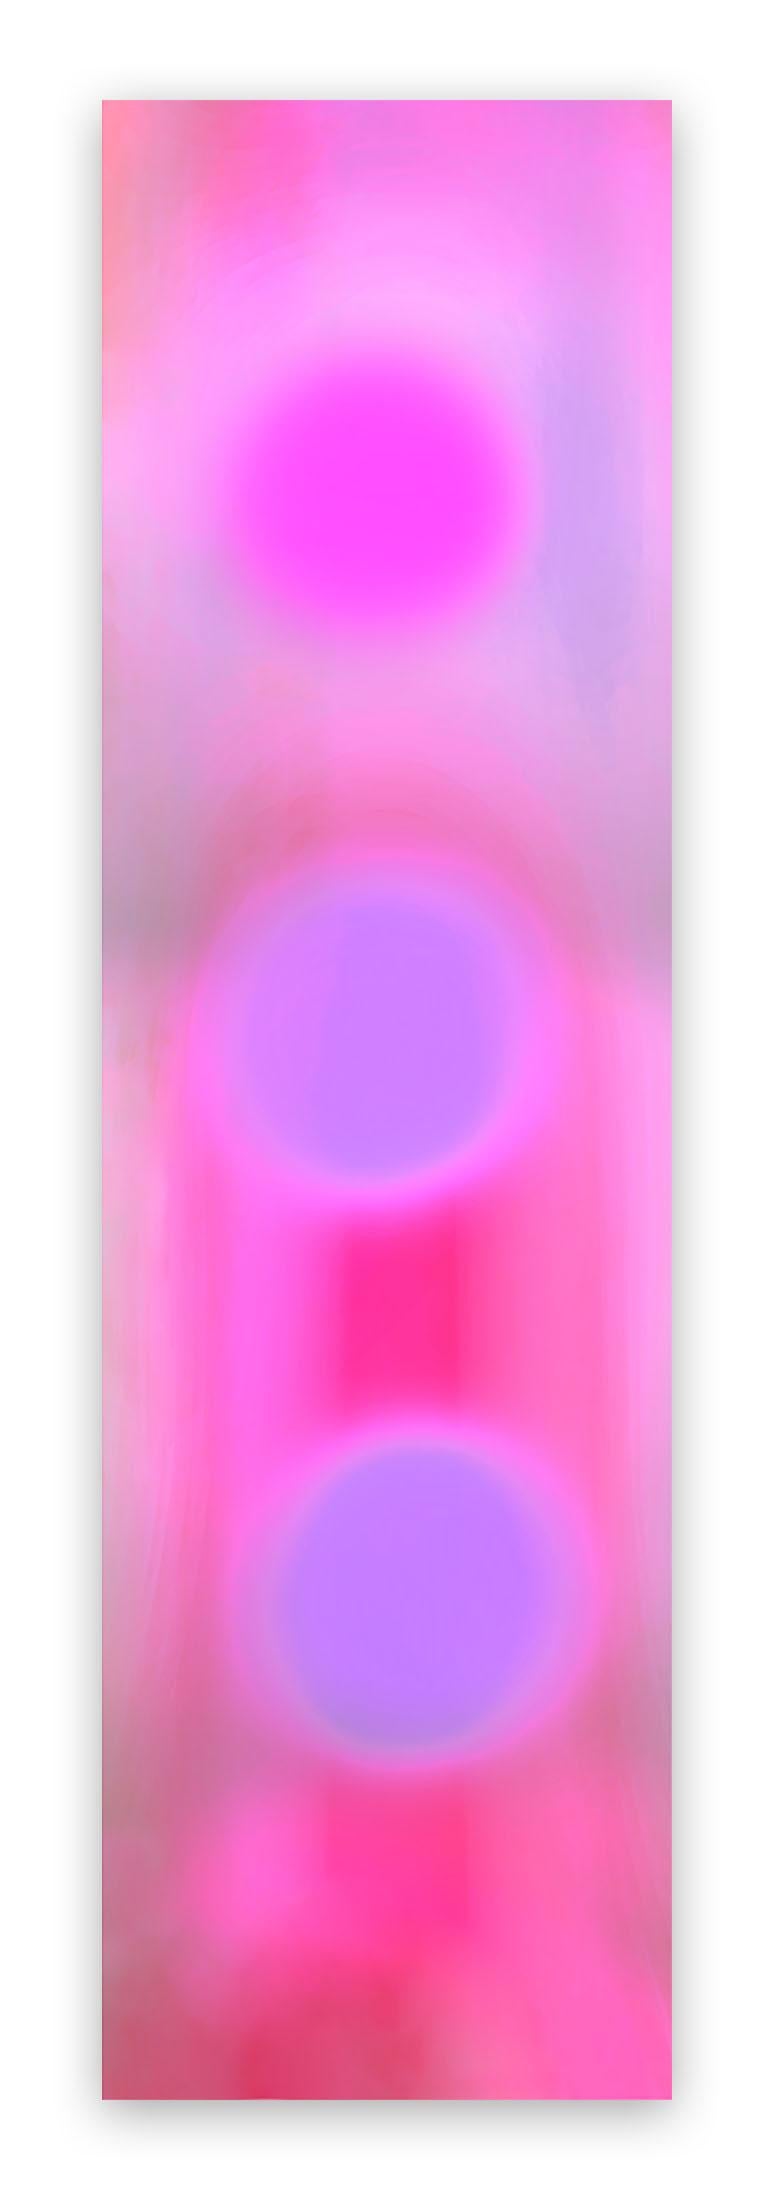 EM-104 Geshe (Abstract Photography)

Pigment on canvas - Unframed.

Edition of 3.

The Emanations series is an attempt to express the spiritual potential of the most essential aspect of photography: light. Each work in the series began its evolution